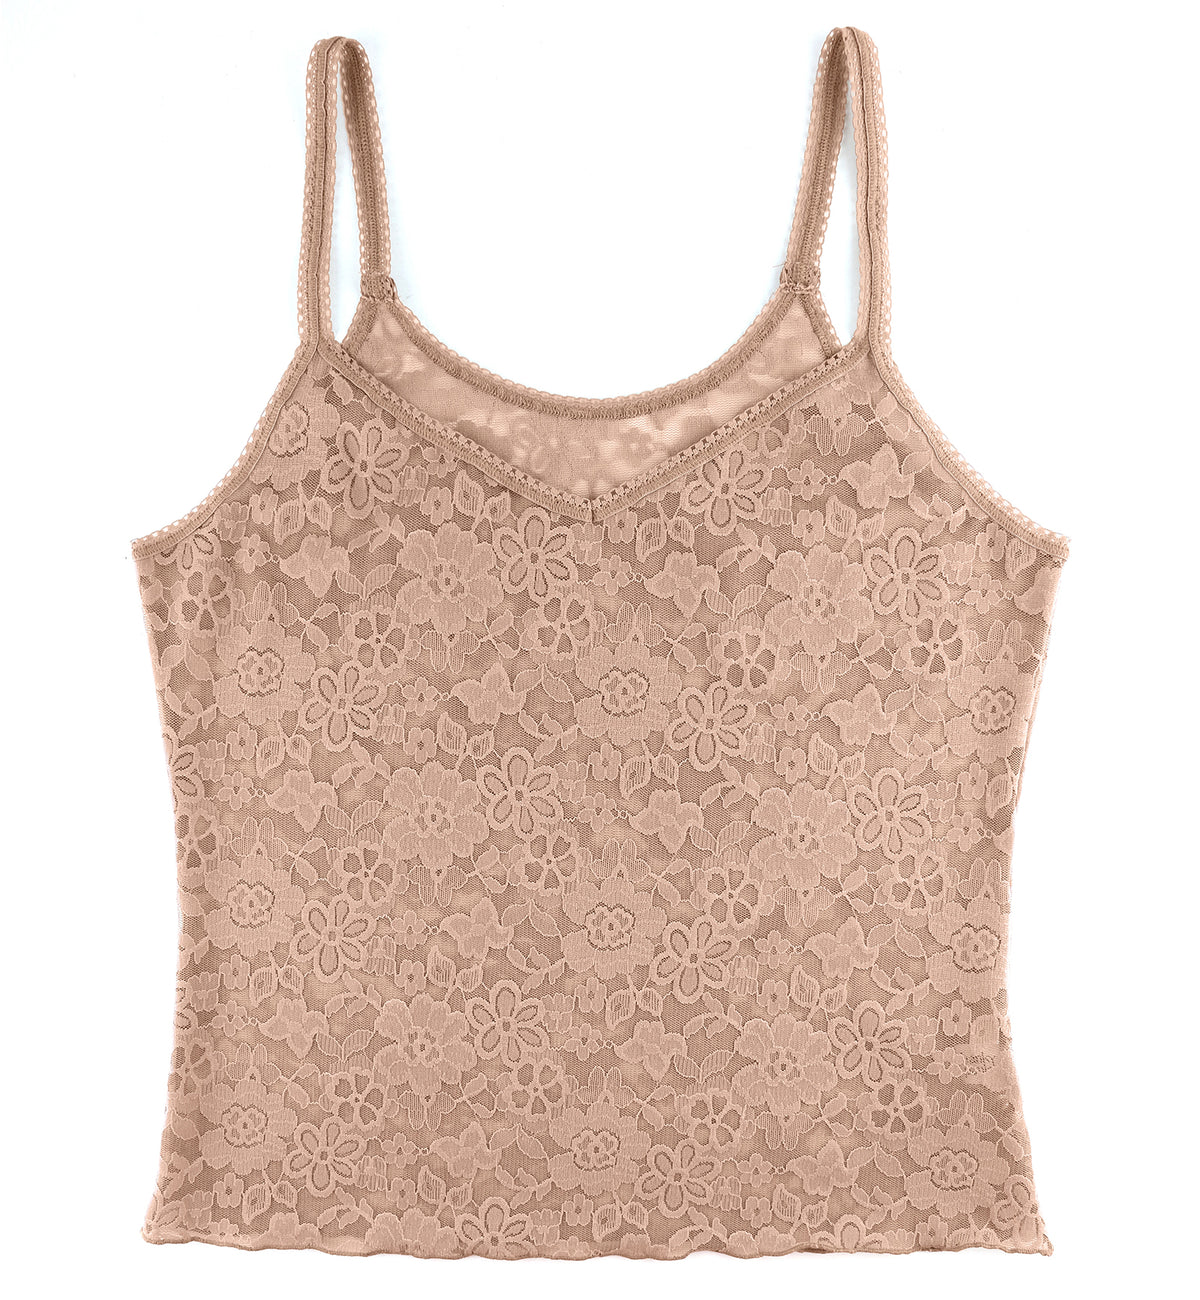 Hanky Panky Daily Lace Camisole (774731),XS,Taupe - Taupe,XS